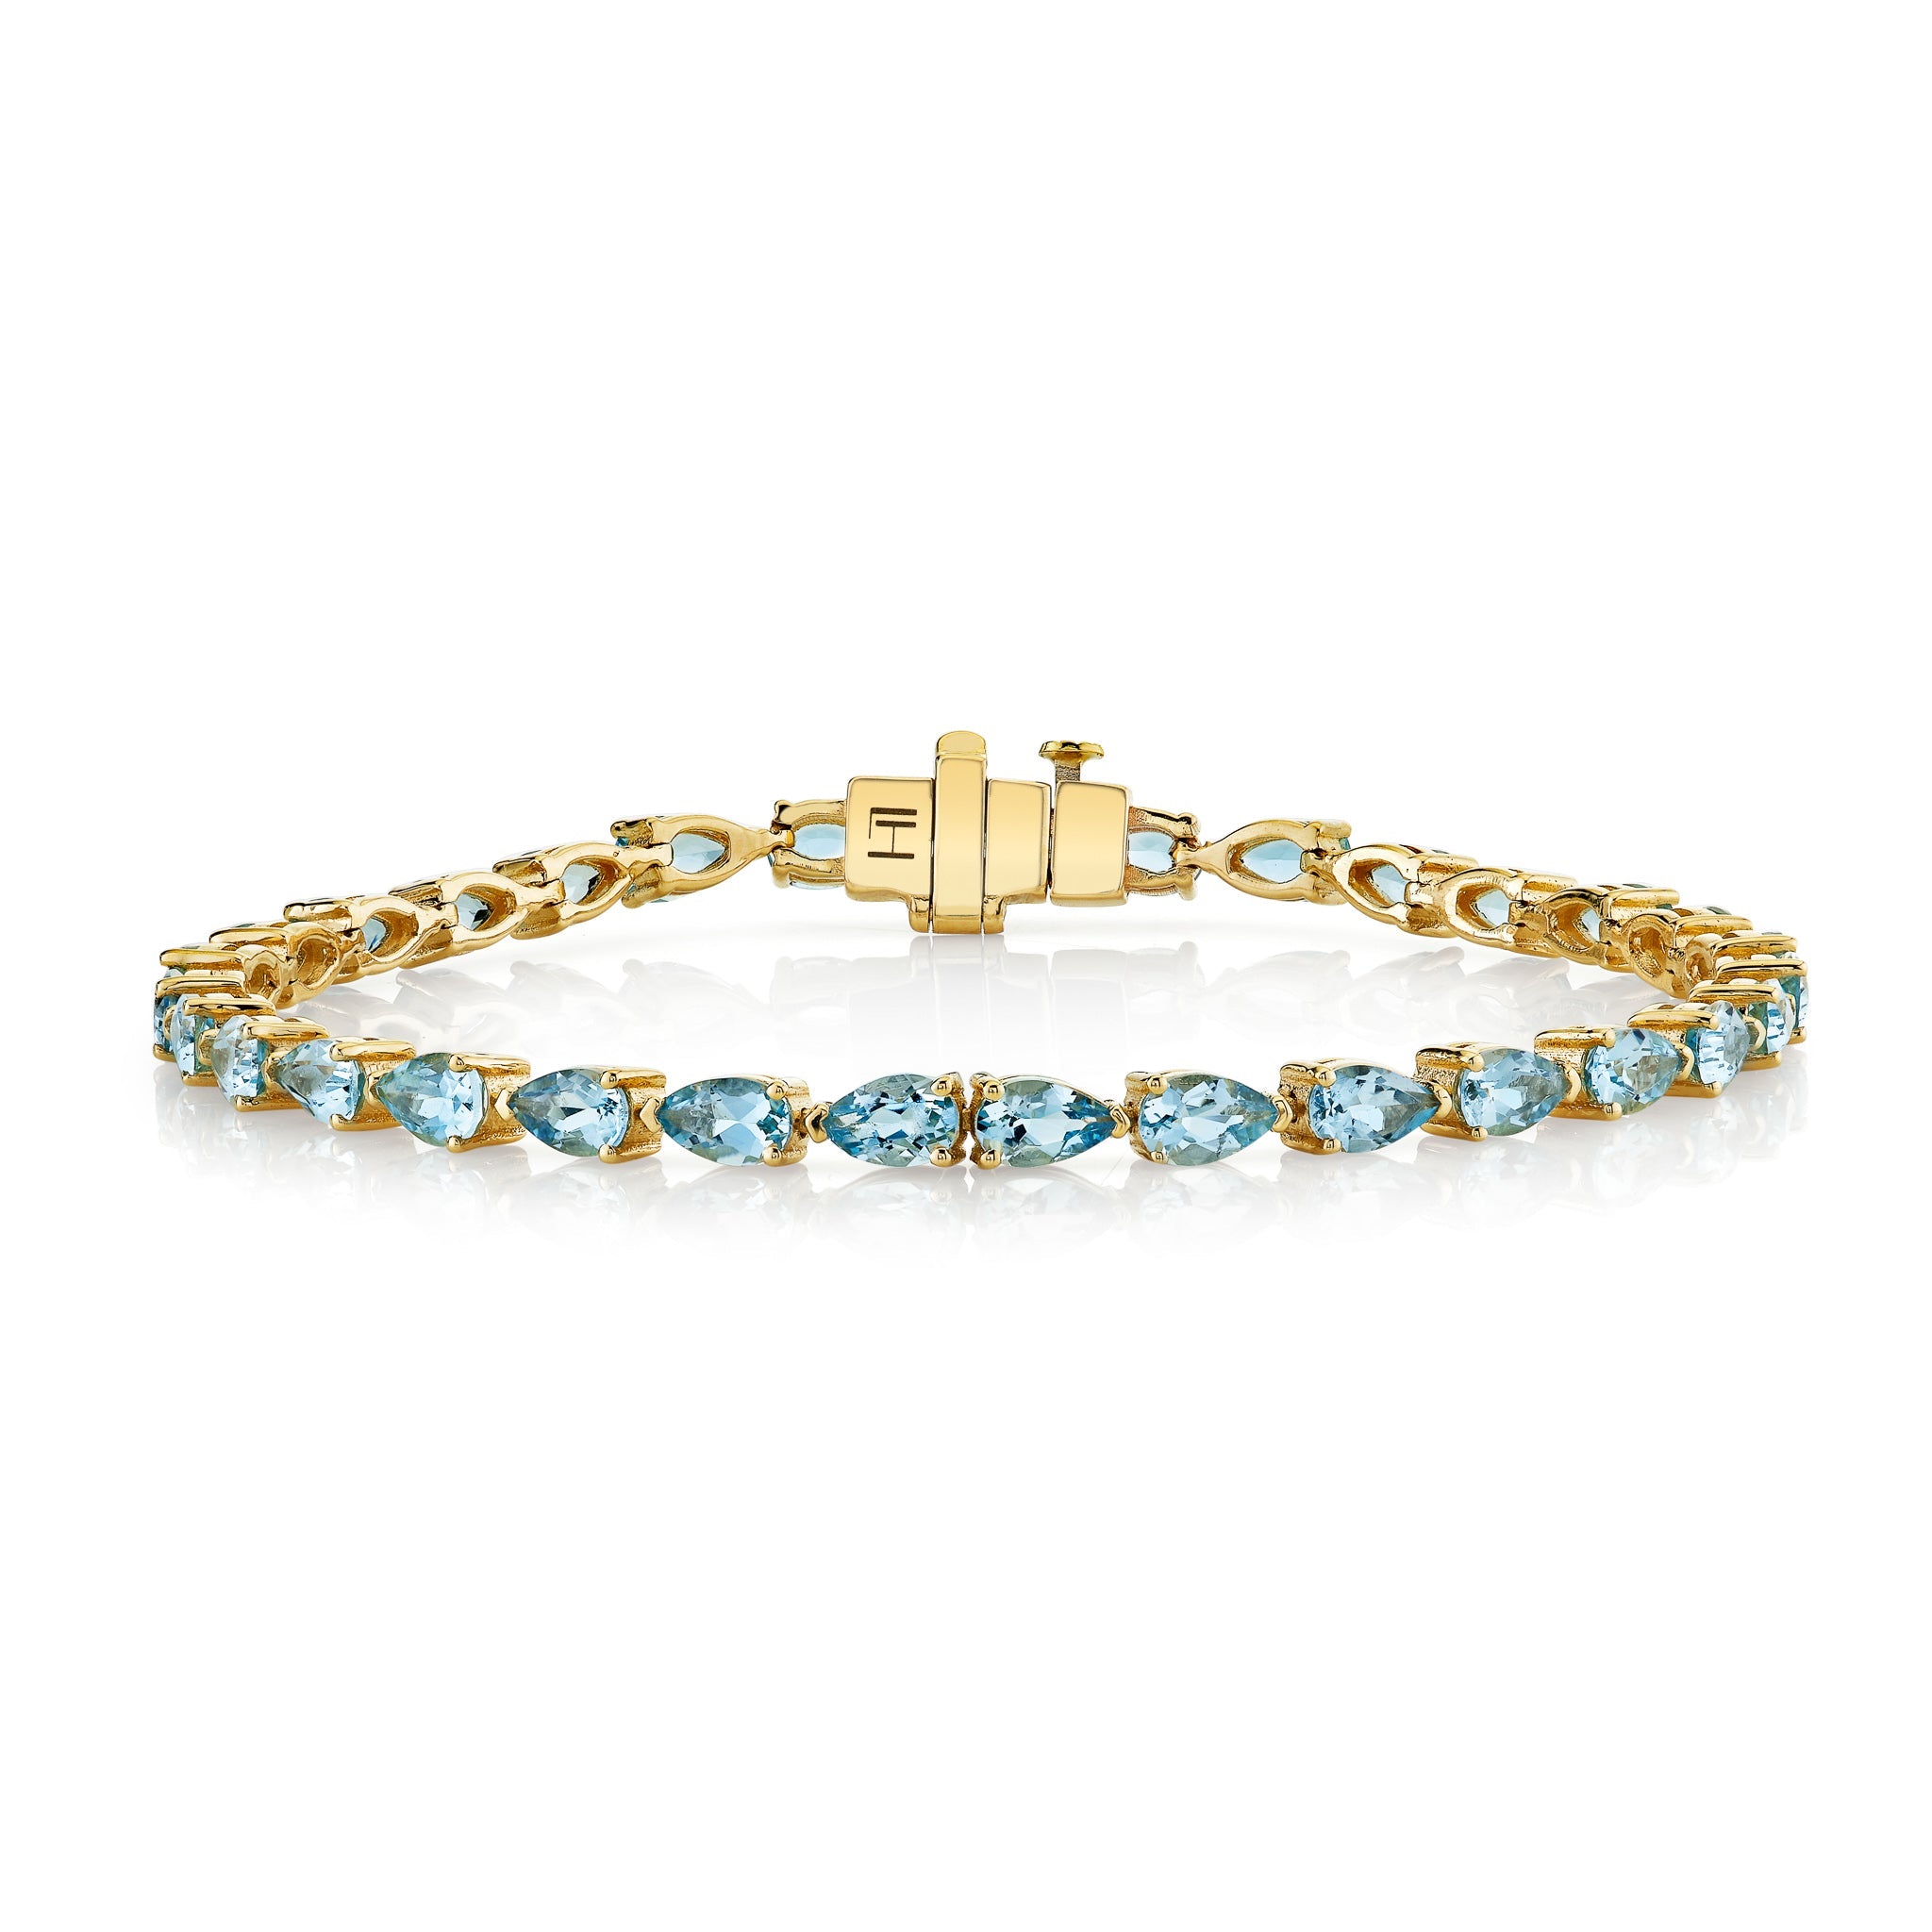 Tiffany & Co. 14kt yellow gold bracelet with aquamarine (signed, 1940/50s)  - Auction Fine Jewels Watches Fashion Vintage - Colasanti Casa d'Aste